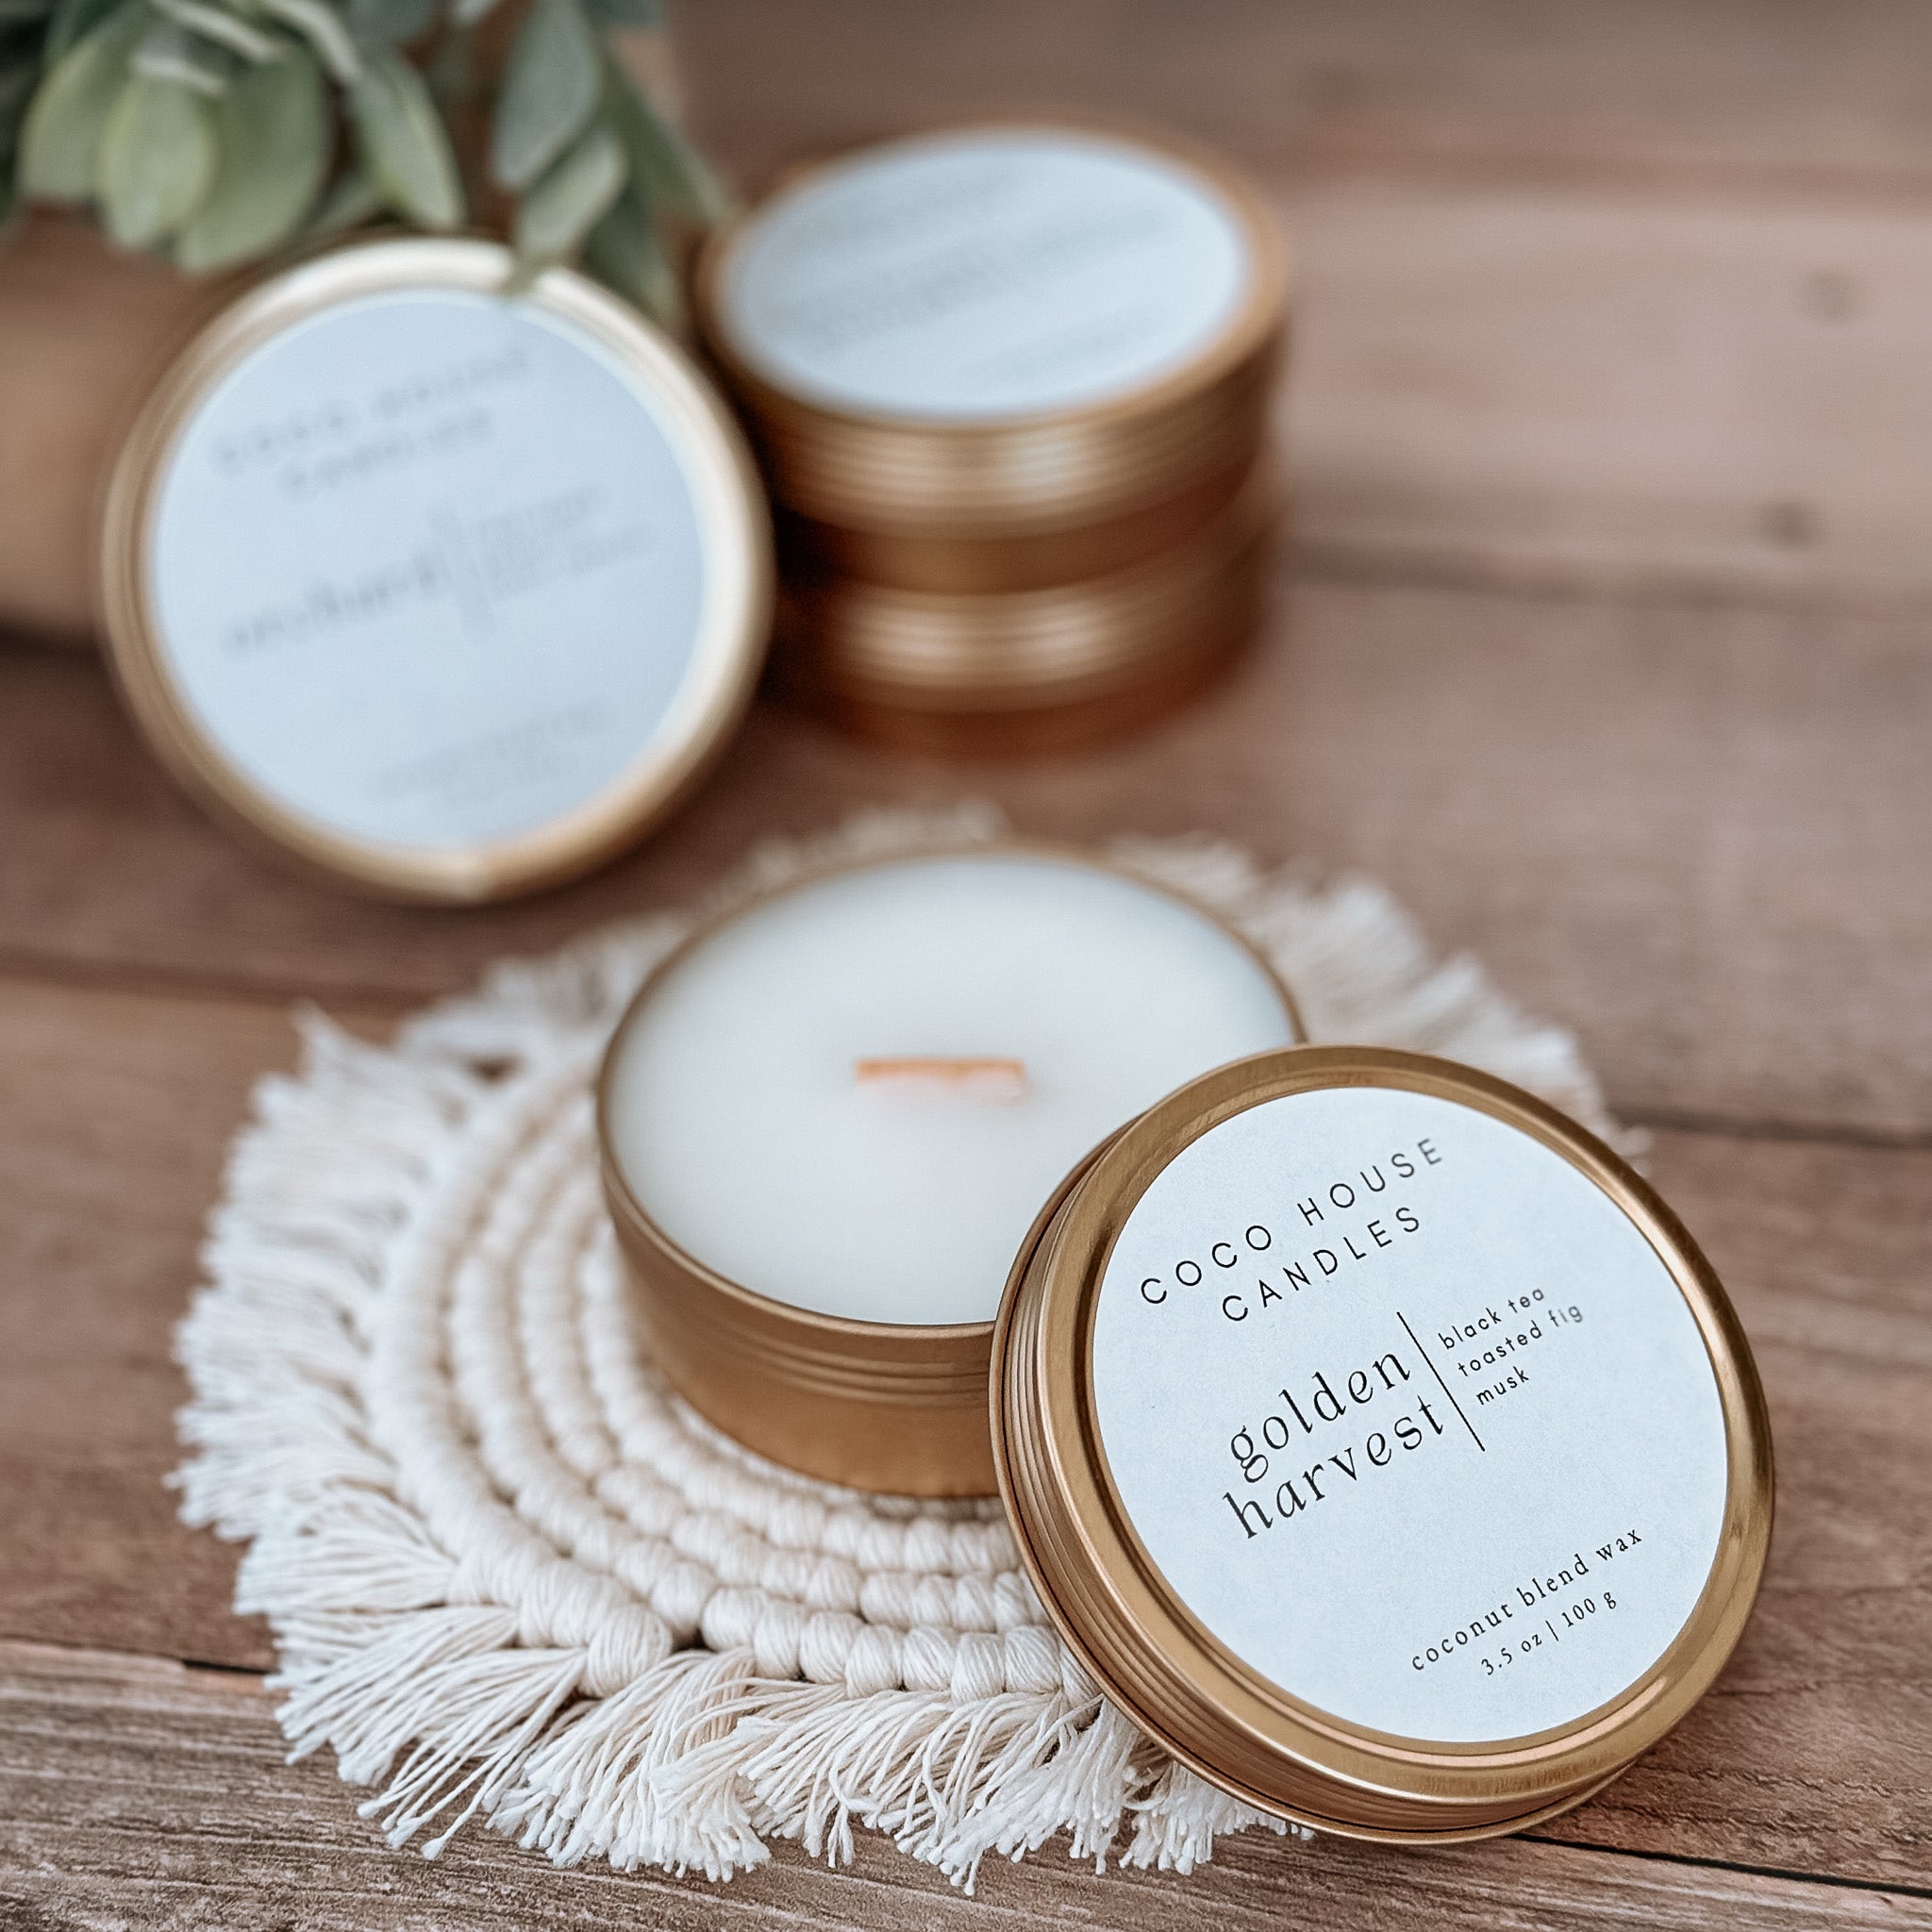 Travel Candles - Coco House Candles - Travel Candle